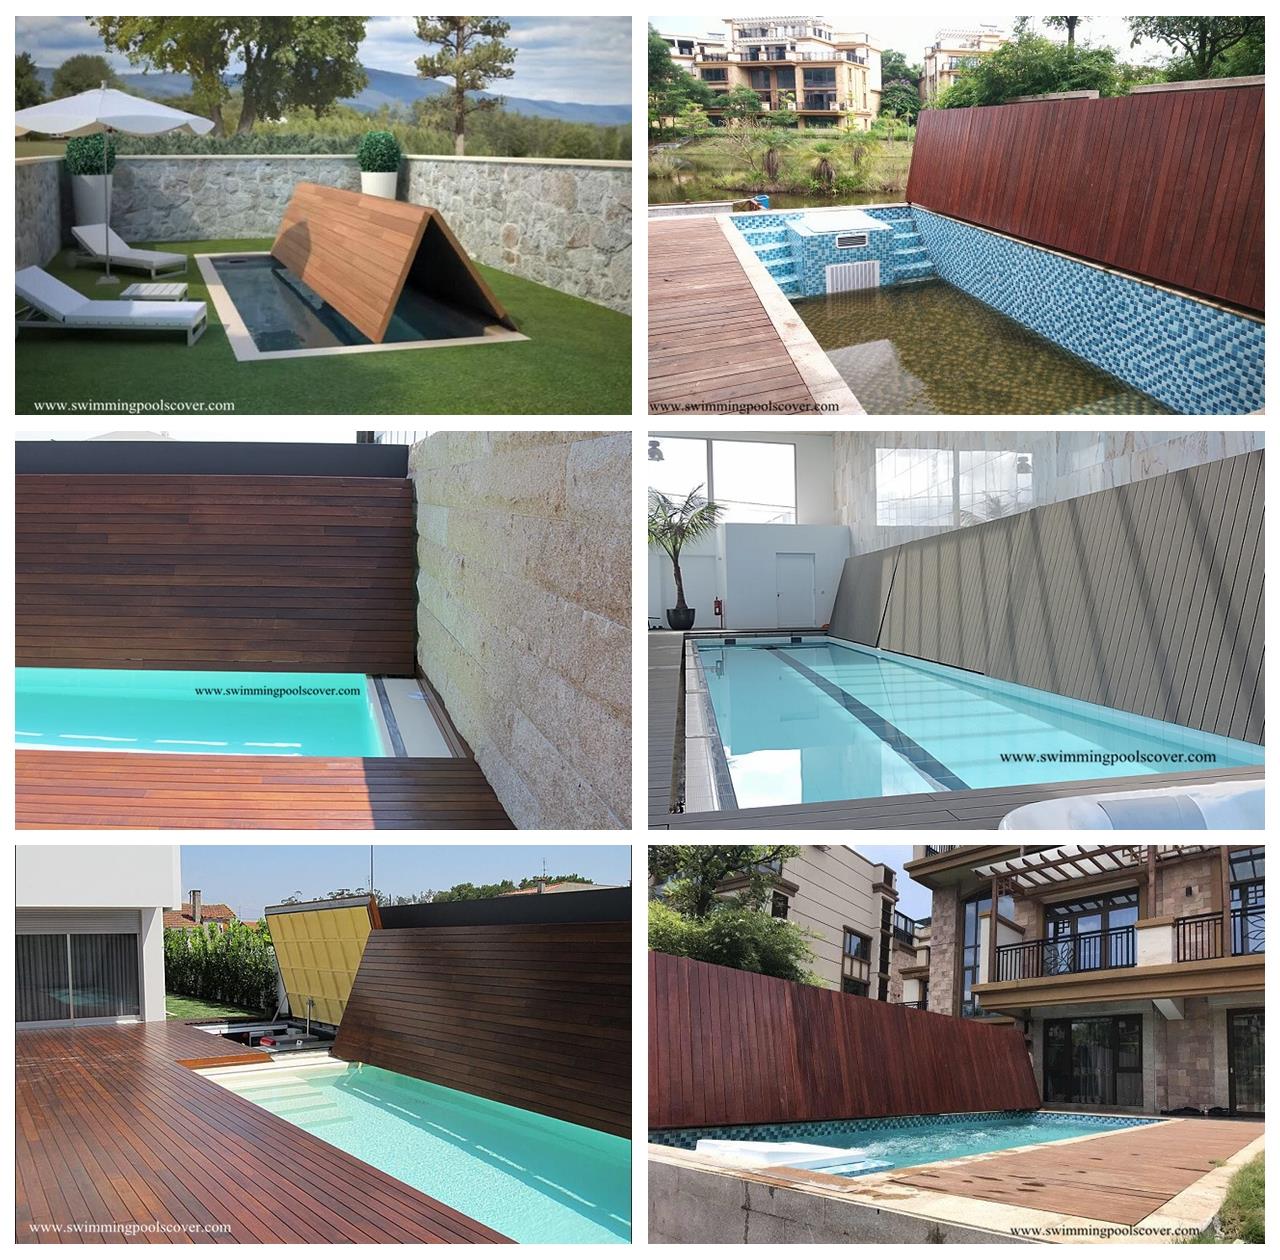 Automatic Fold Swimming Pool Covers Above Ground to Save Space.jpg